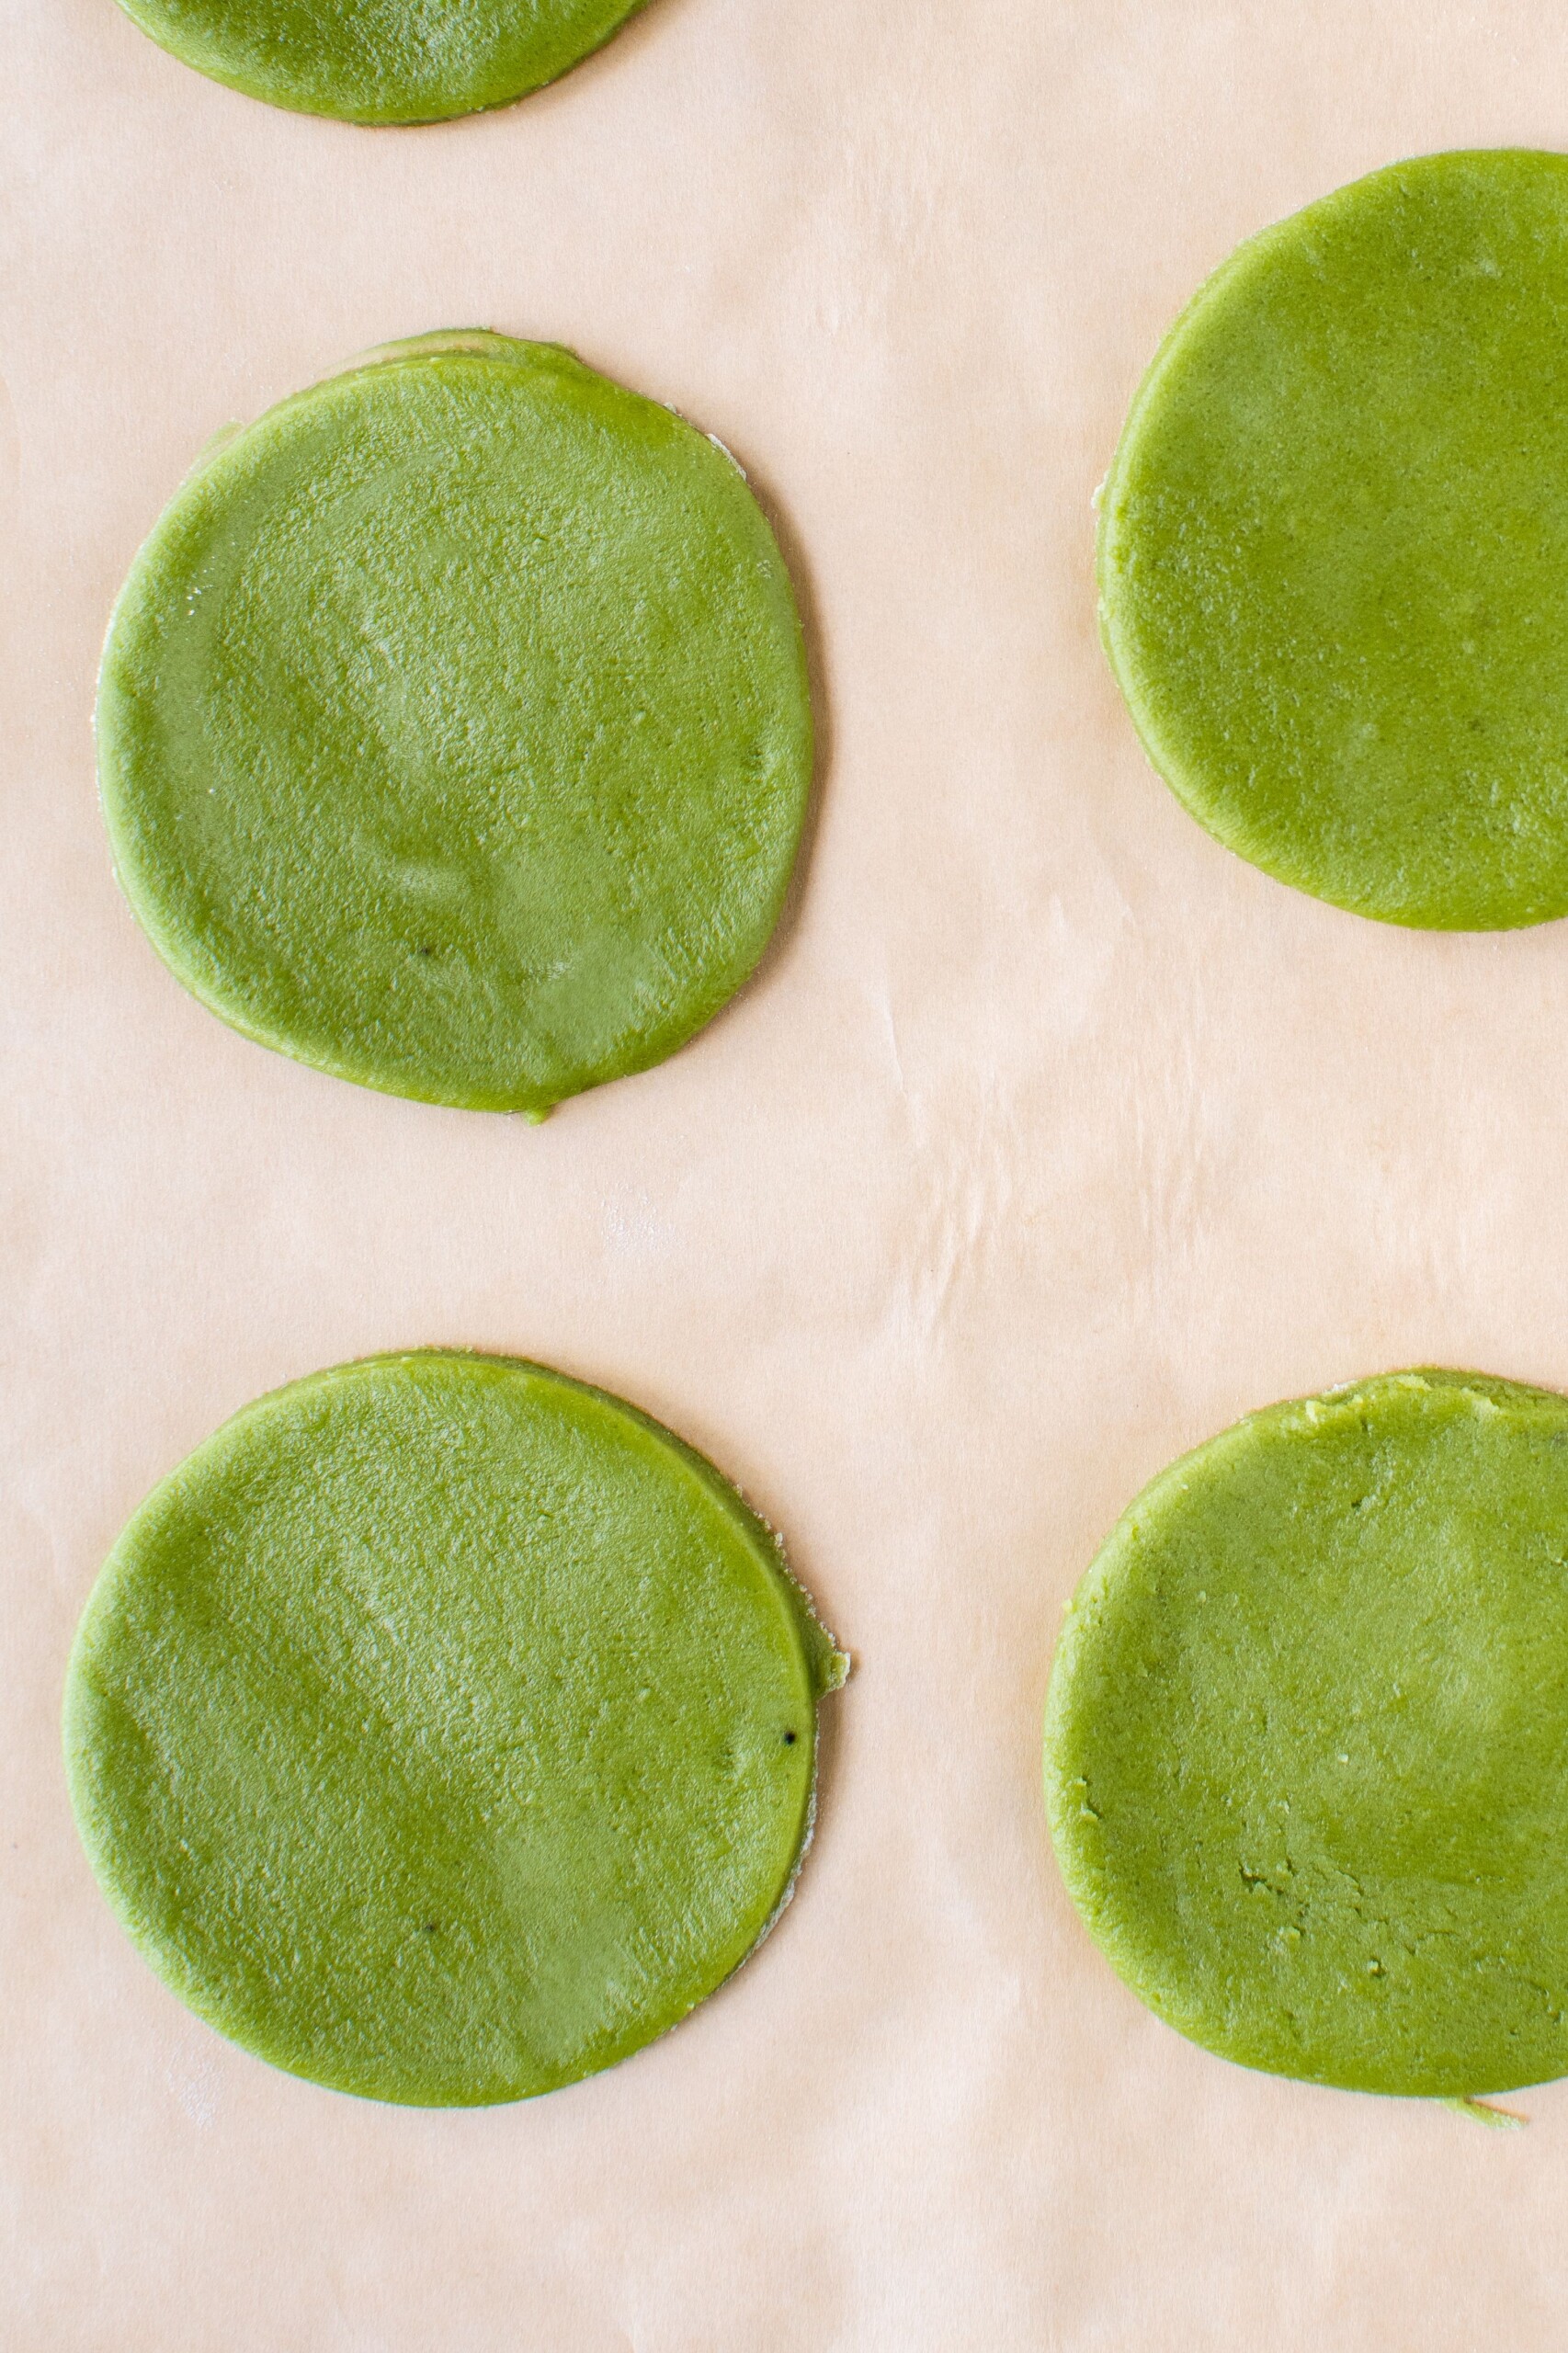 Green Matcha cookies before baking, laid on a baking sheet with parchment paper